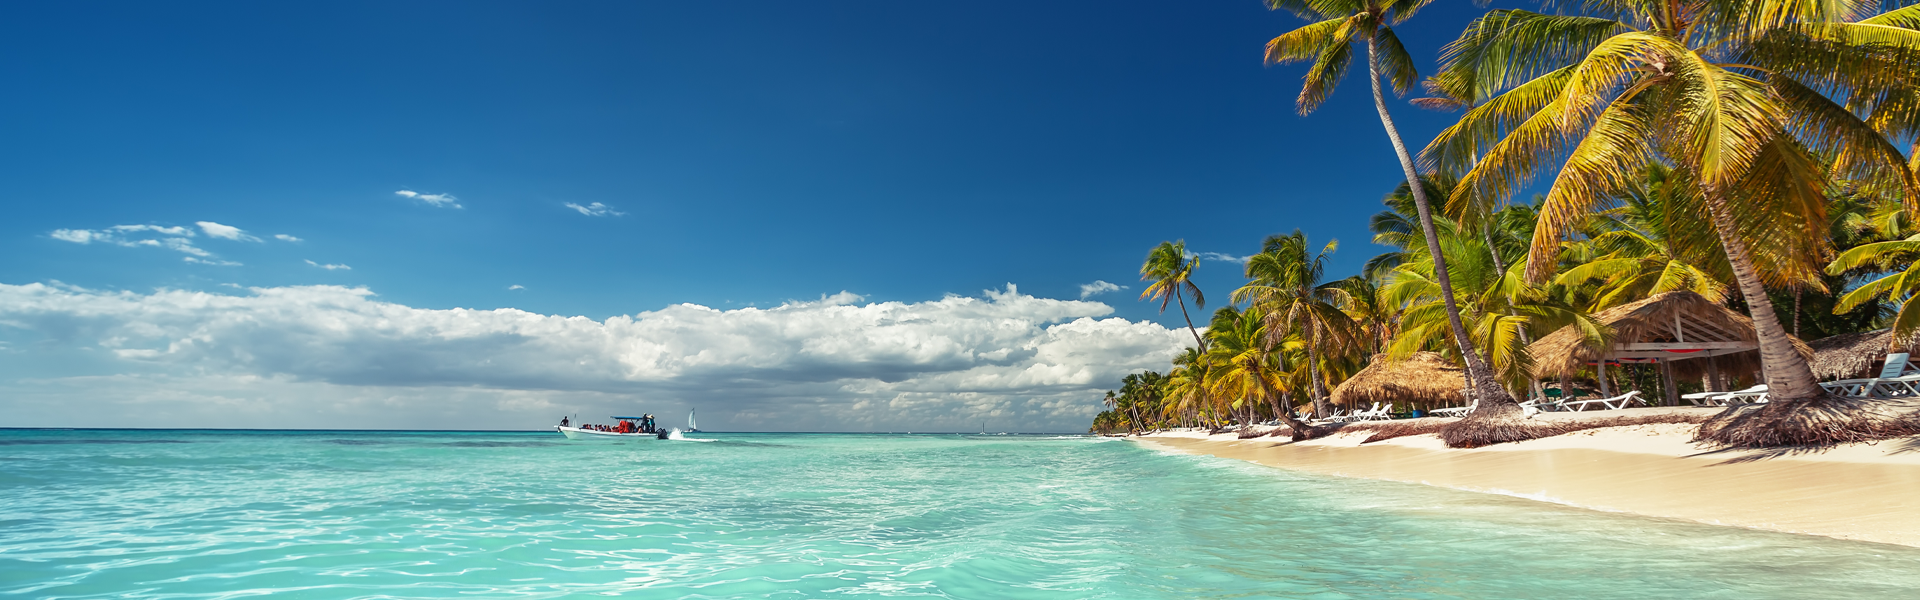 All-Inclusive Cruises to the Caribbean  